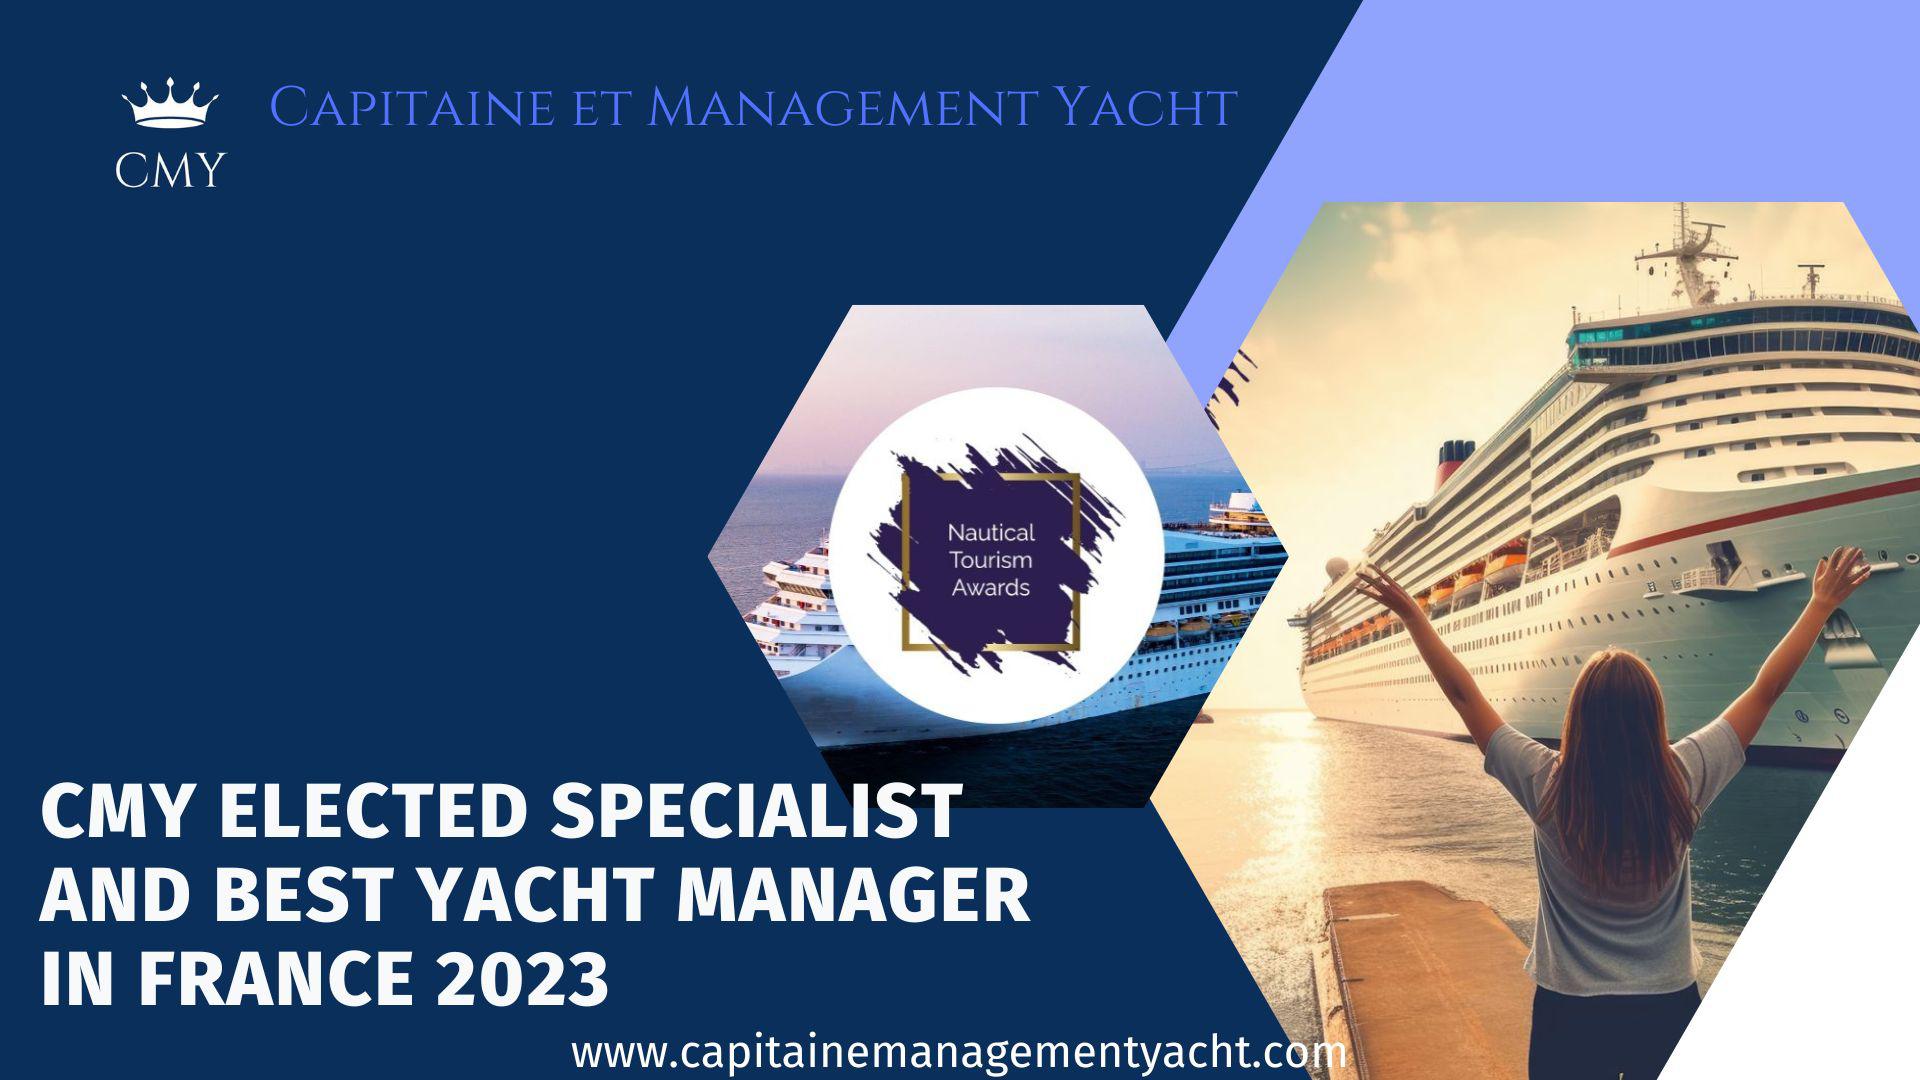 CMY elected specialist and best yacht manager in France 2023